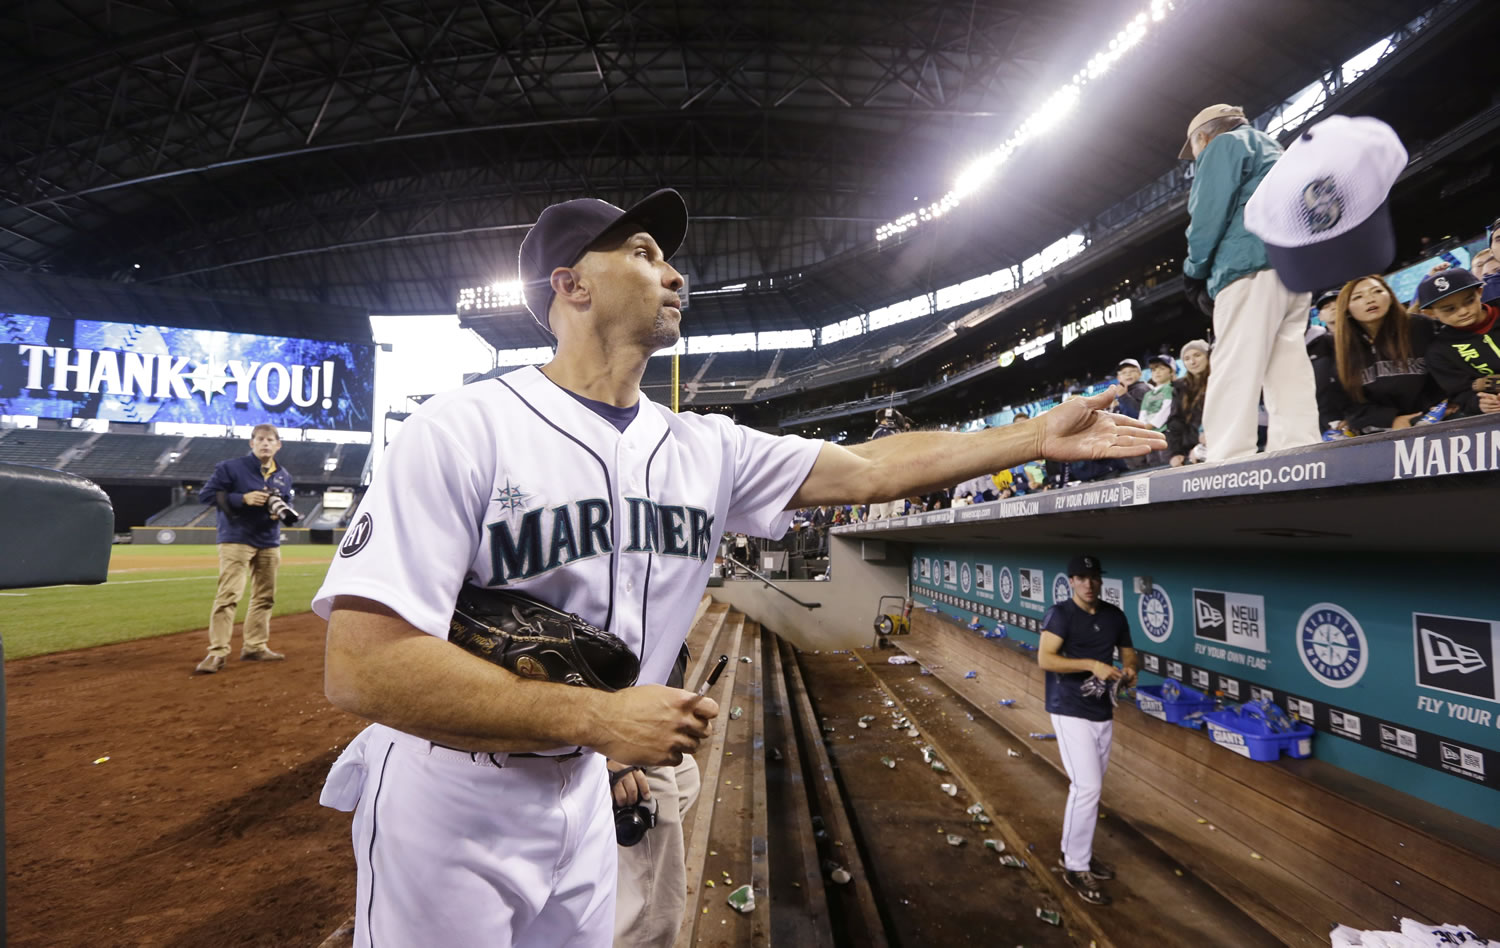 Seattle Mariners outfielder Raul Ibanez tosses a cap he autographed back to a fan after the Mariners' final game of the season Sunday at Safeco Field.